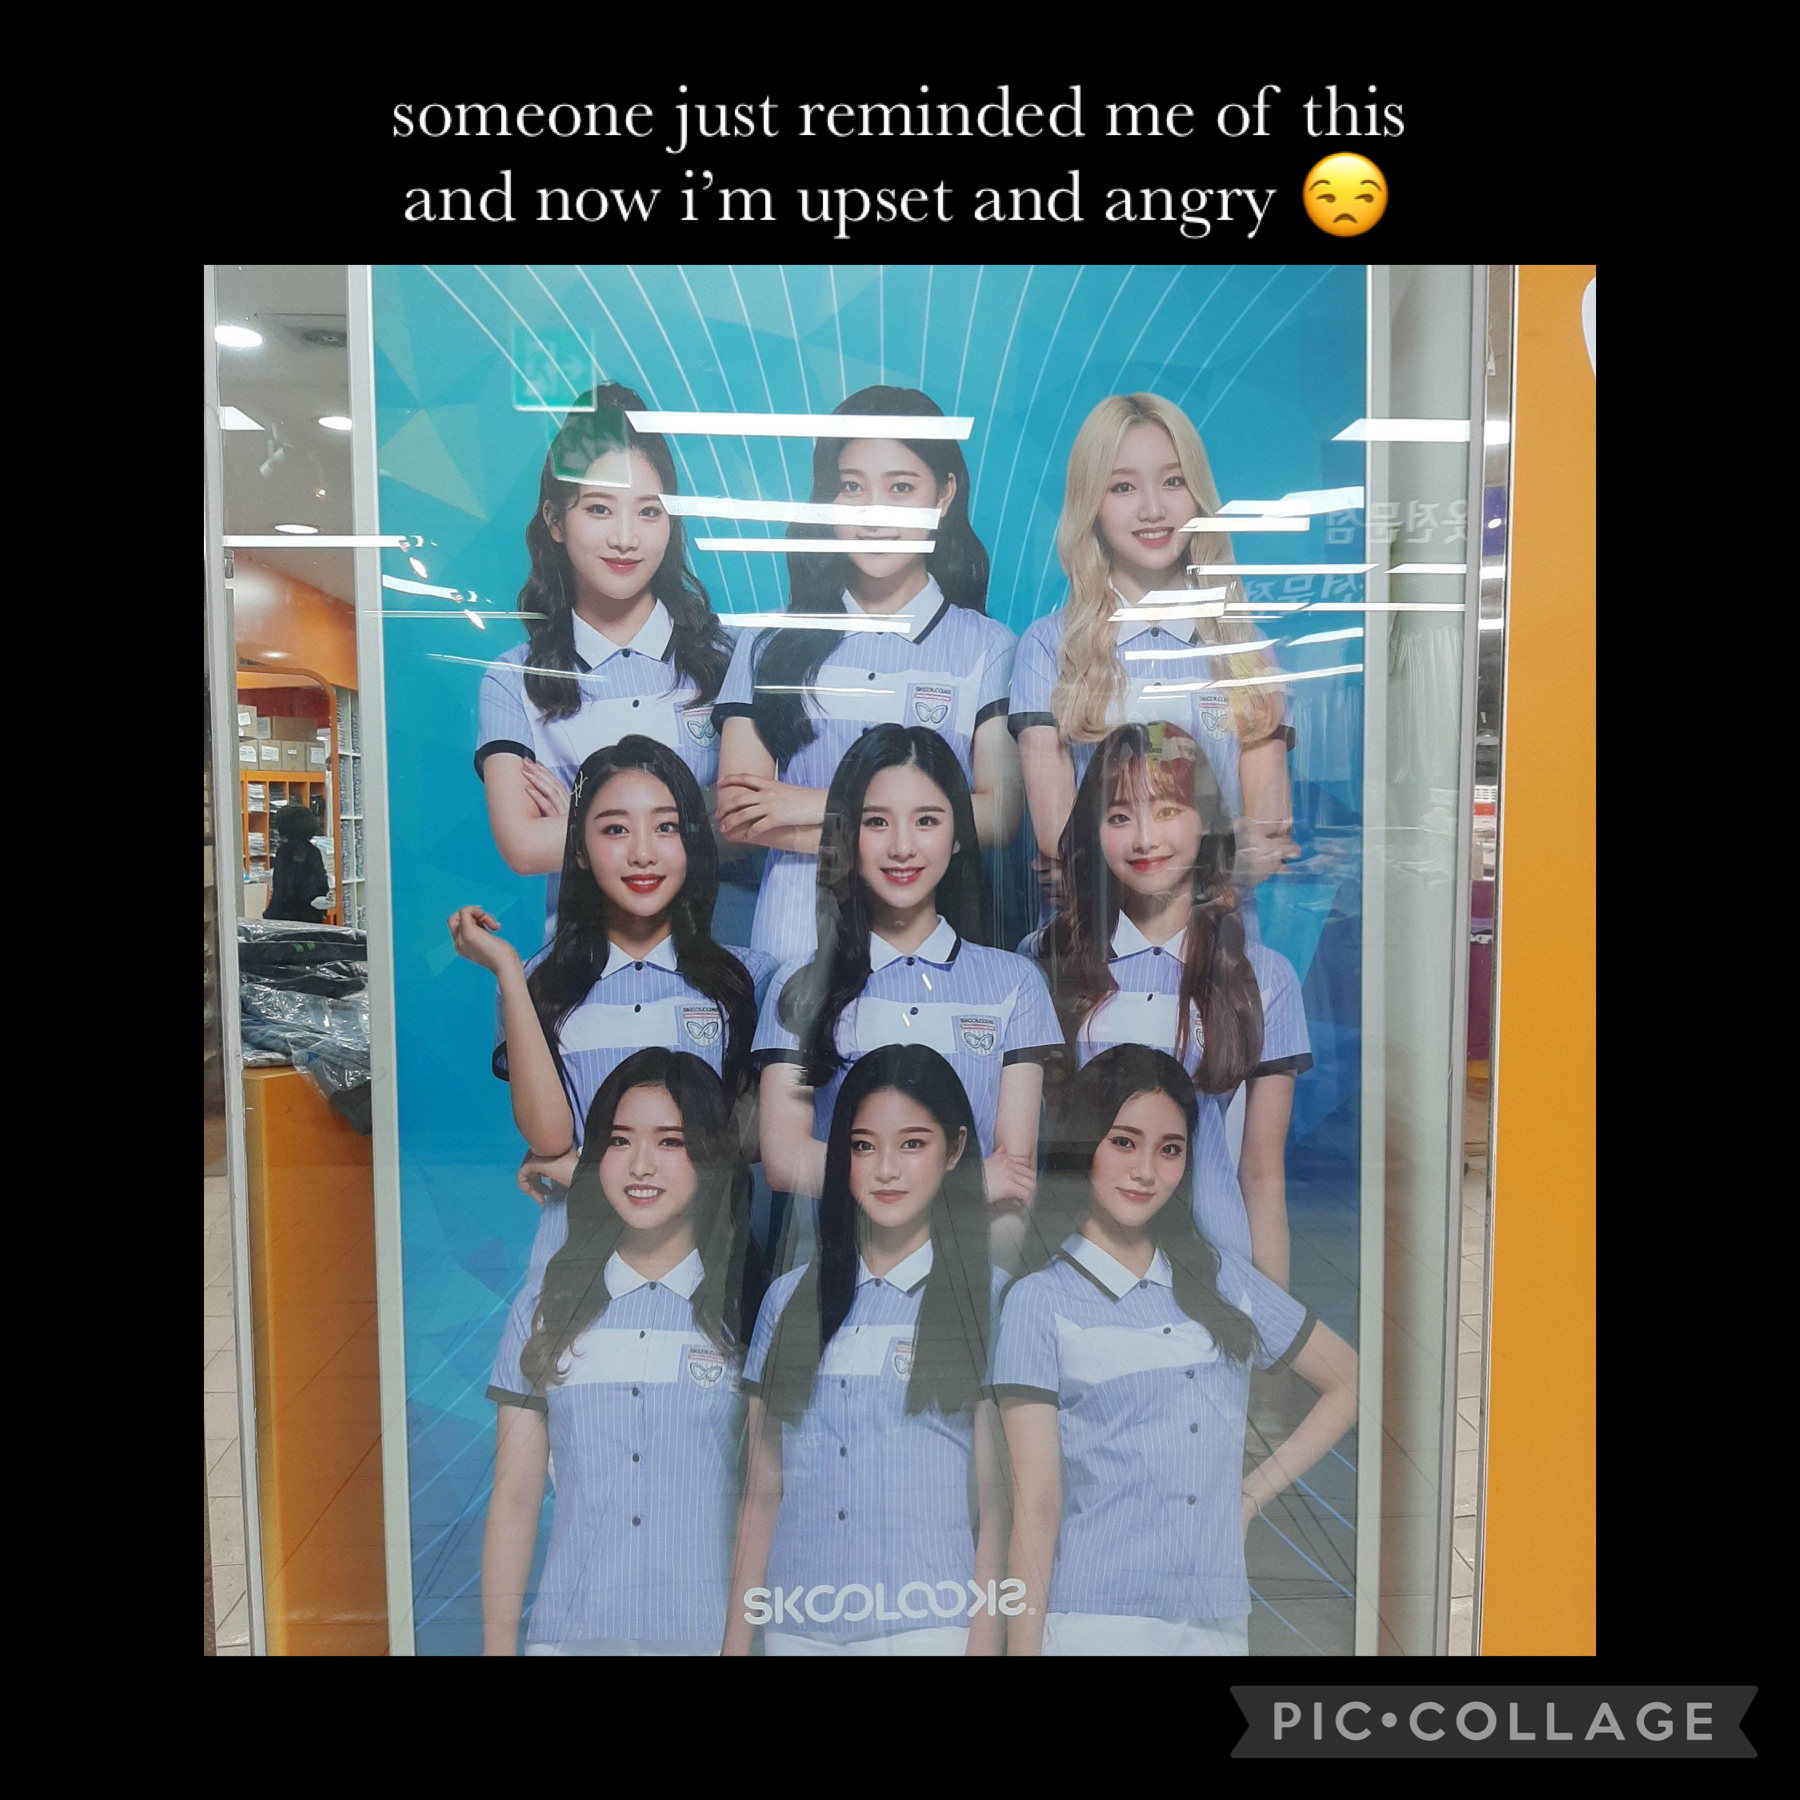 for context this is a group called loona, there are twelve members. the company took a picture of the twelve of them and edited out three members...